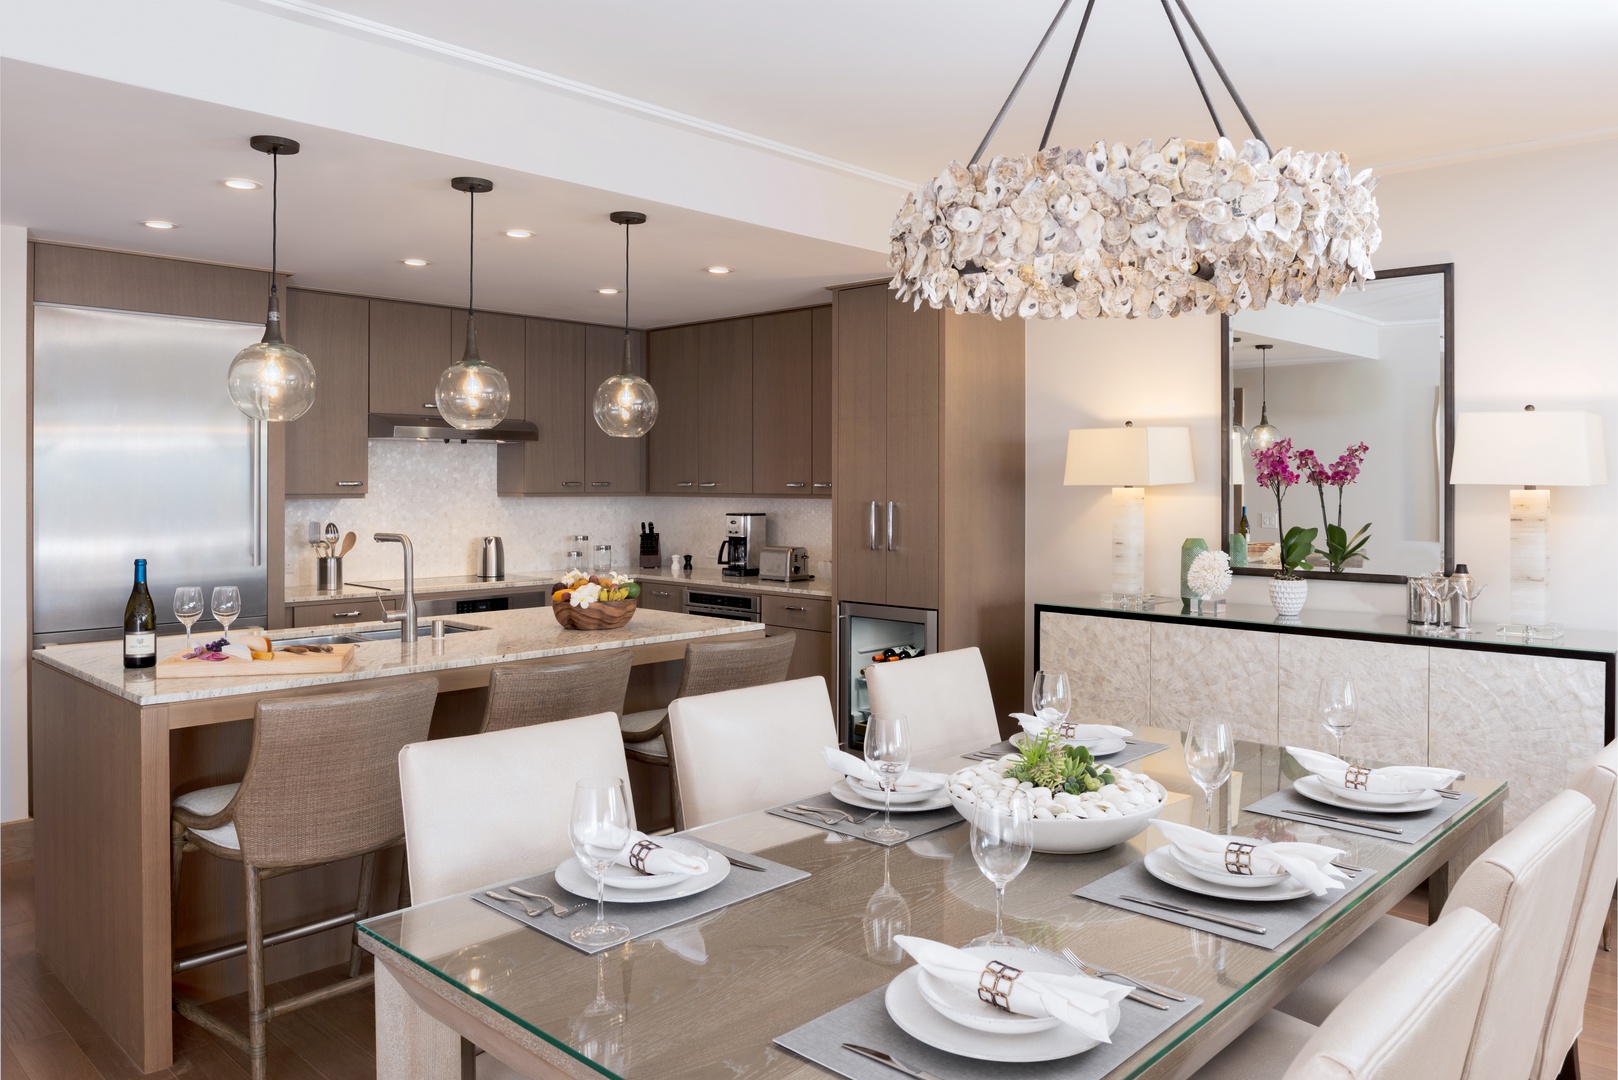 Lihue Vacation Rentals, Maliula at Hokuala 3BR Premiere* - The residences feature formal dining spaces as well as bar seating in sleek, well-equipped kitchens.